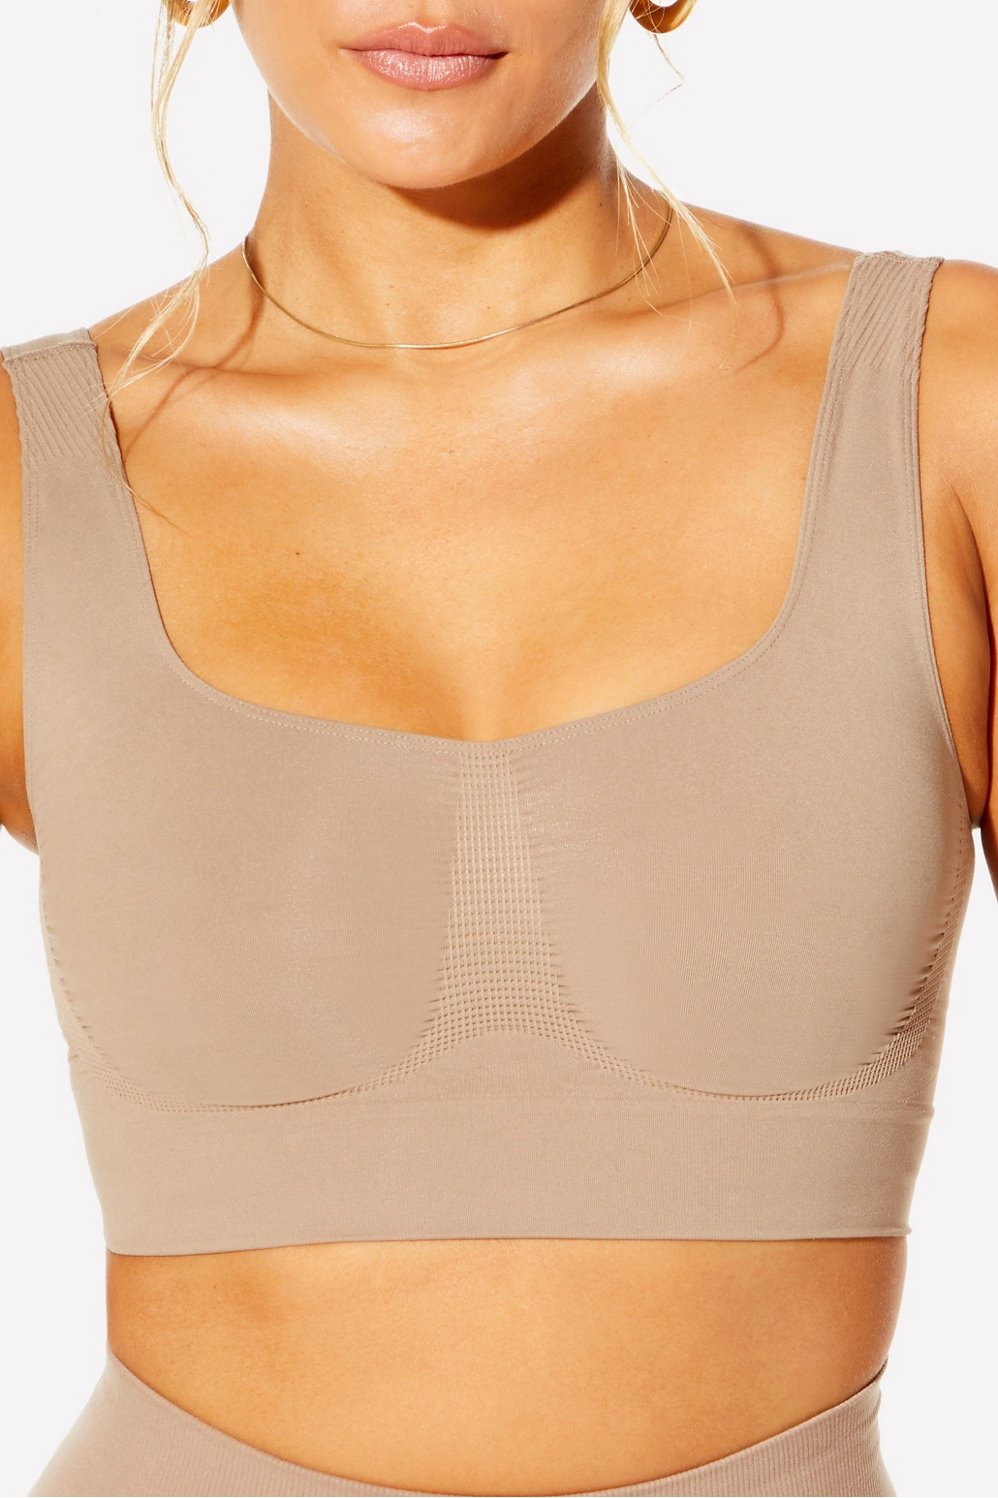 Conte - City Style Bra with Double Cups, nude